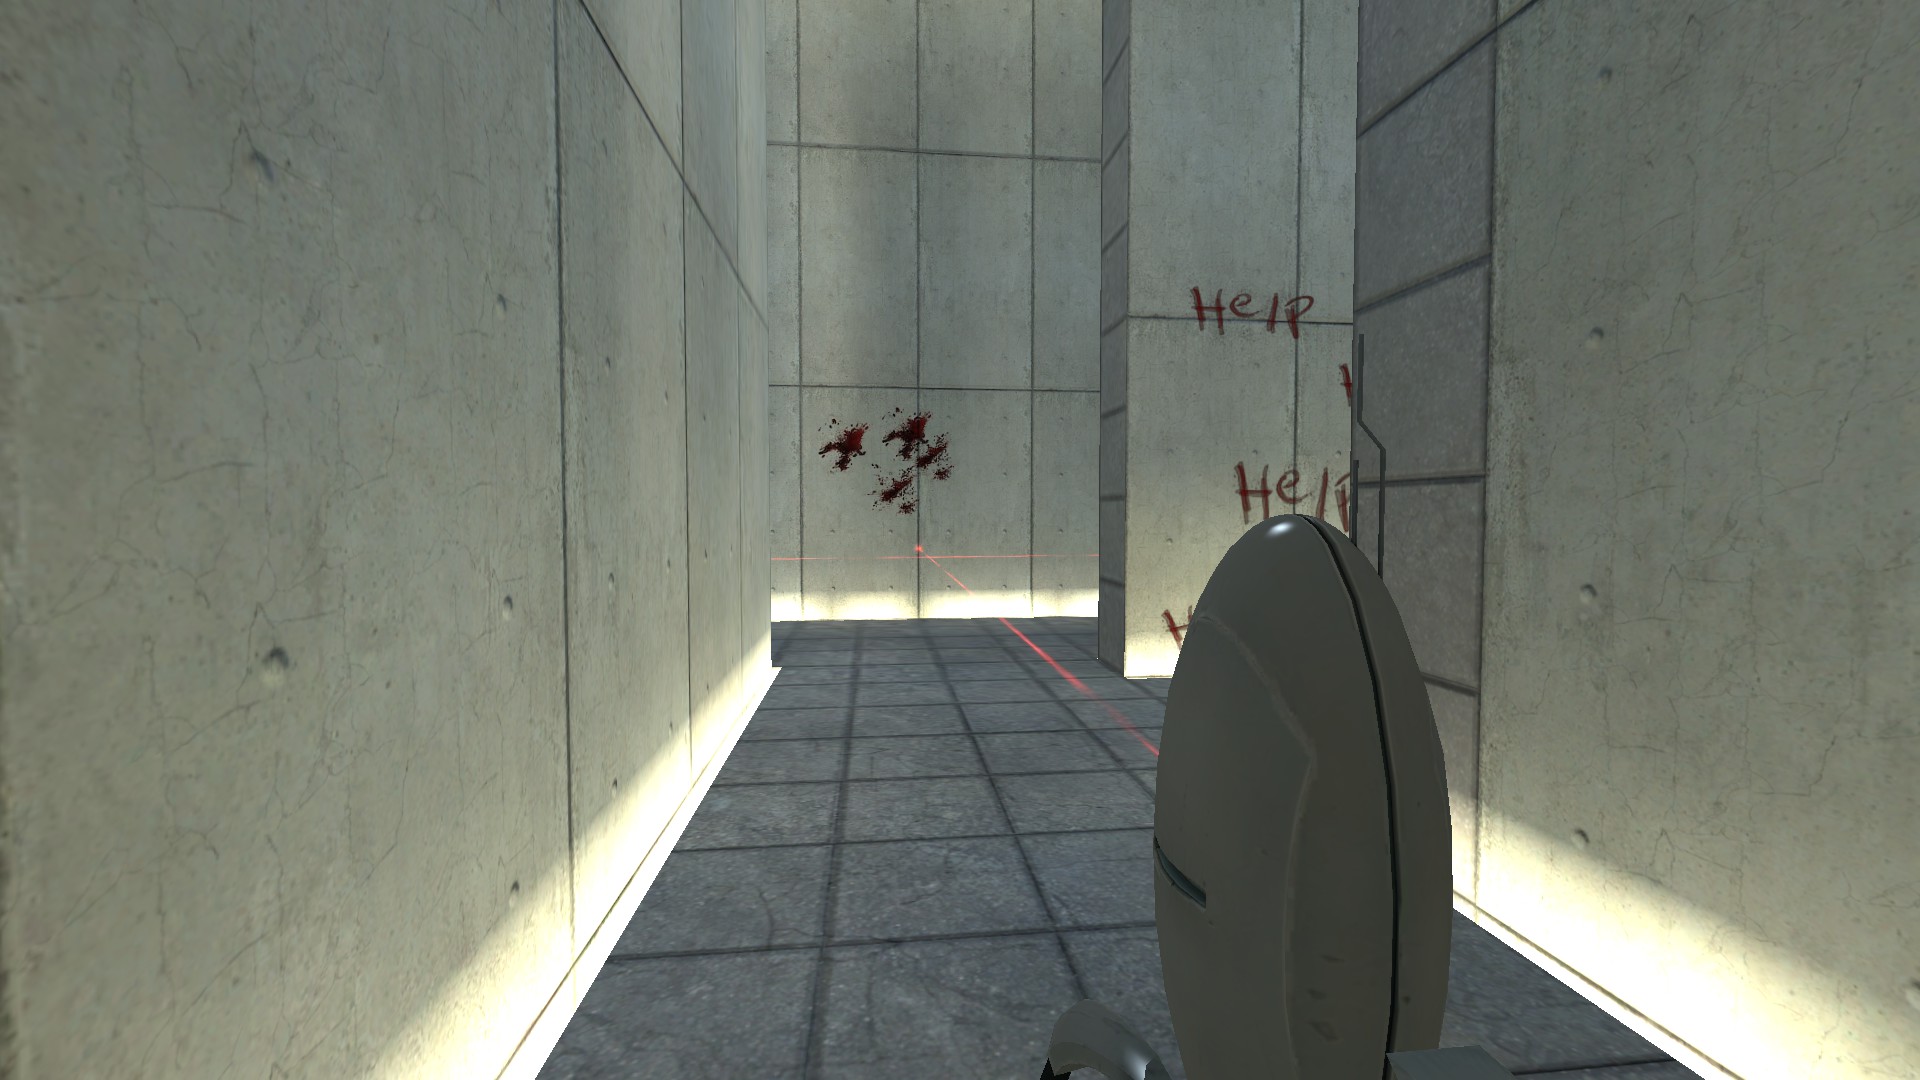 A turret aims down a hallway with multiple branches.